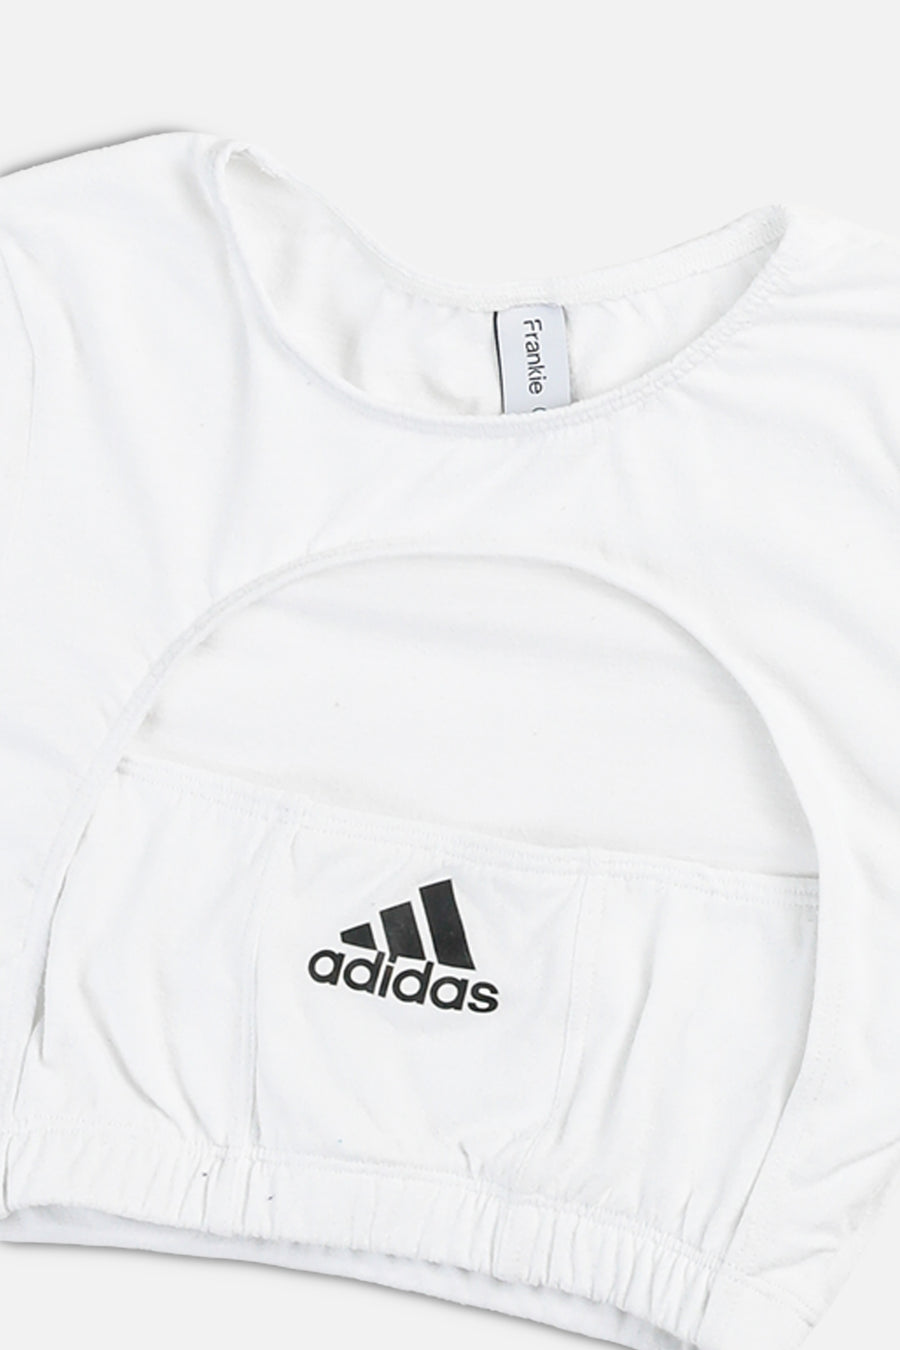 Rework Adidas Cut Out Tee - XS